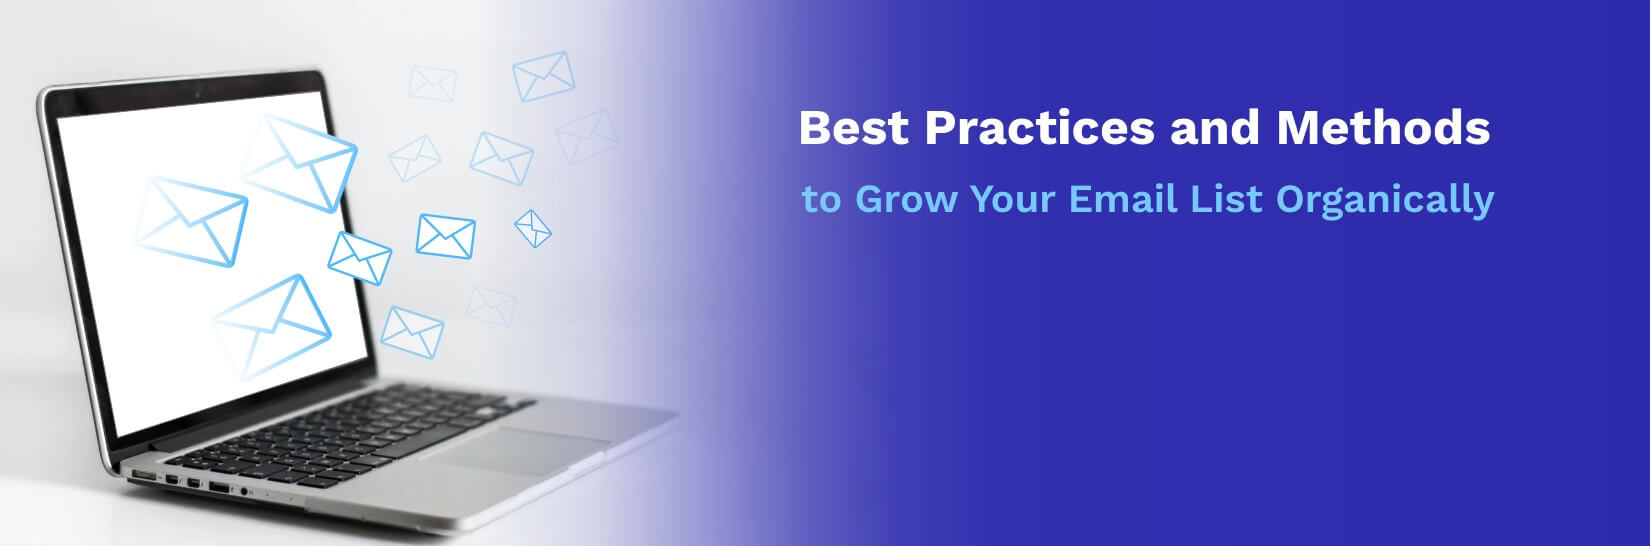 Best Practices and Methods to Grow Your Email List Organically | GlockApps
